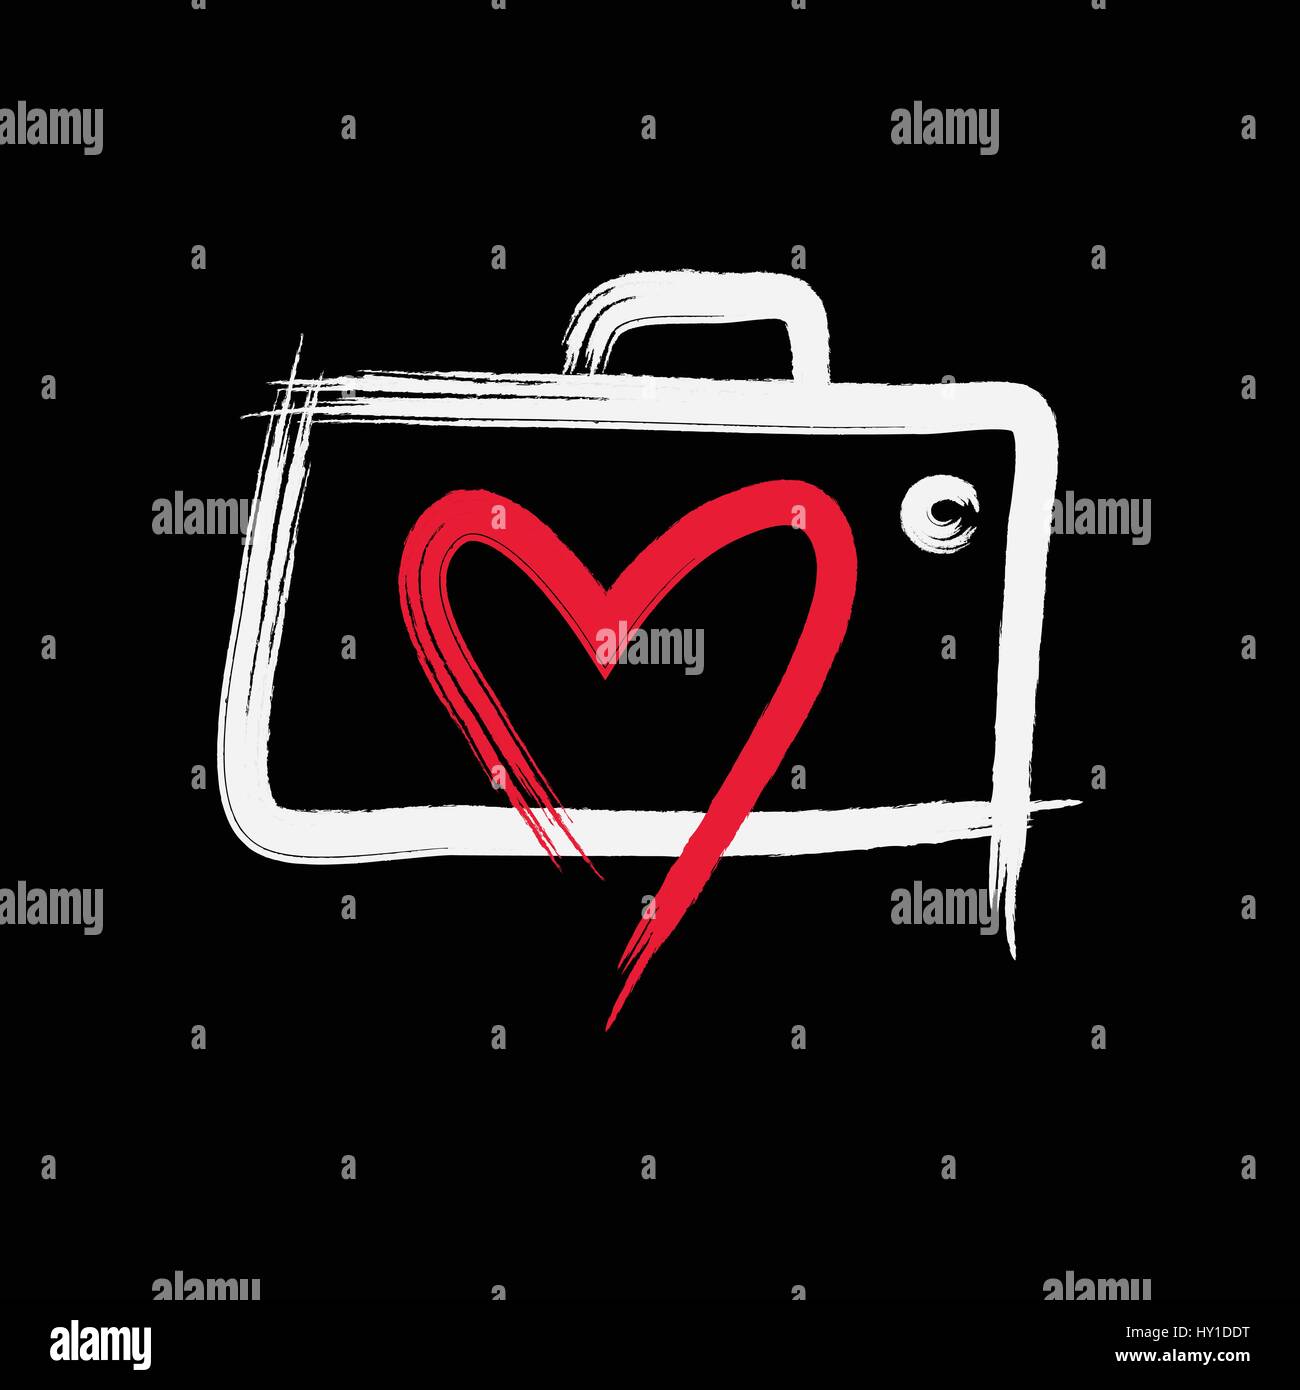 Photography Concept Symbol, vector illustration Stock Vector